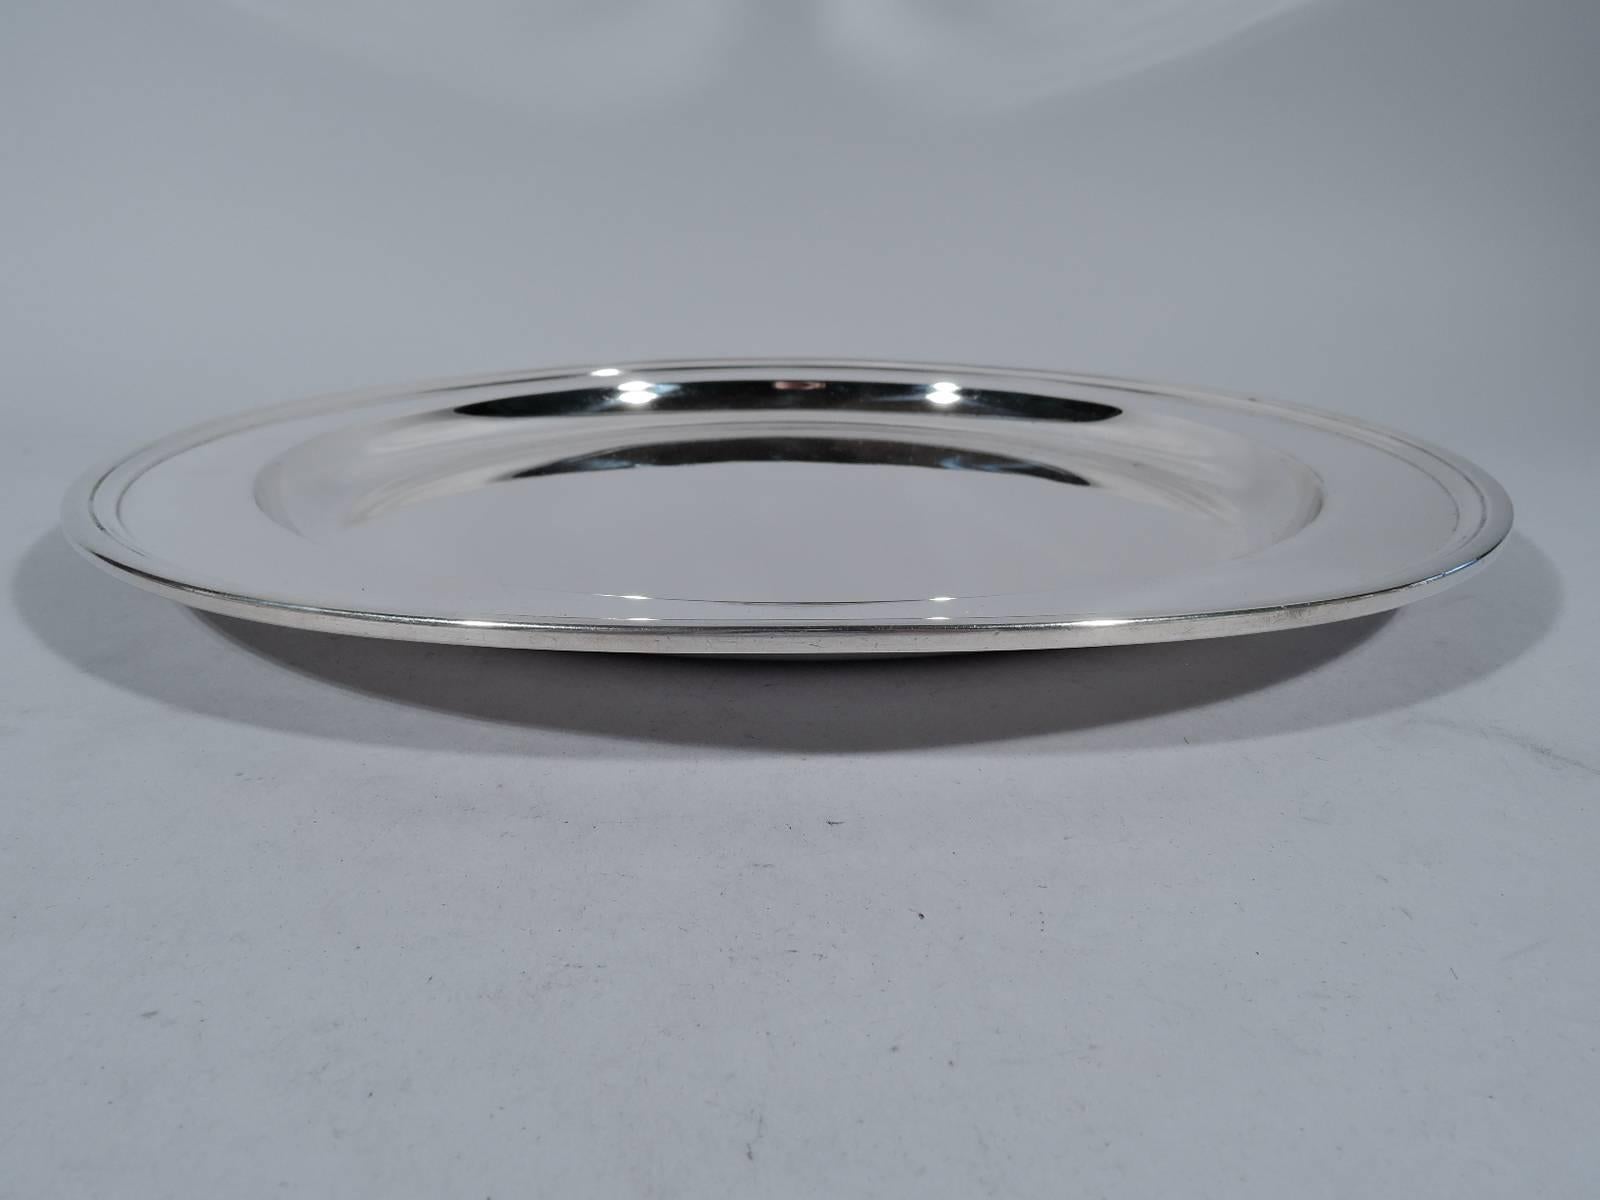 Deep and heavy sterling silver tray. Made by Tiffany & Co. in New York, circa 1923. Circular with deep well and molded rim. Hallmark includes pattern no. 20188 (first produced in 1923) and director's letter m (1907-47). Weight: 30.8 troy ounces.